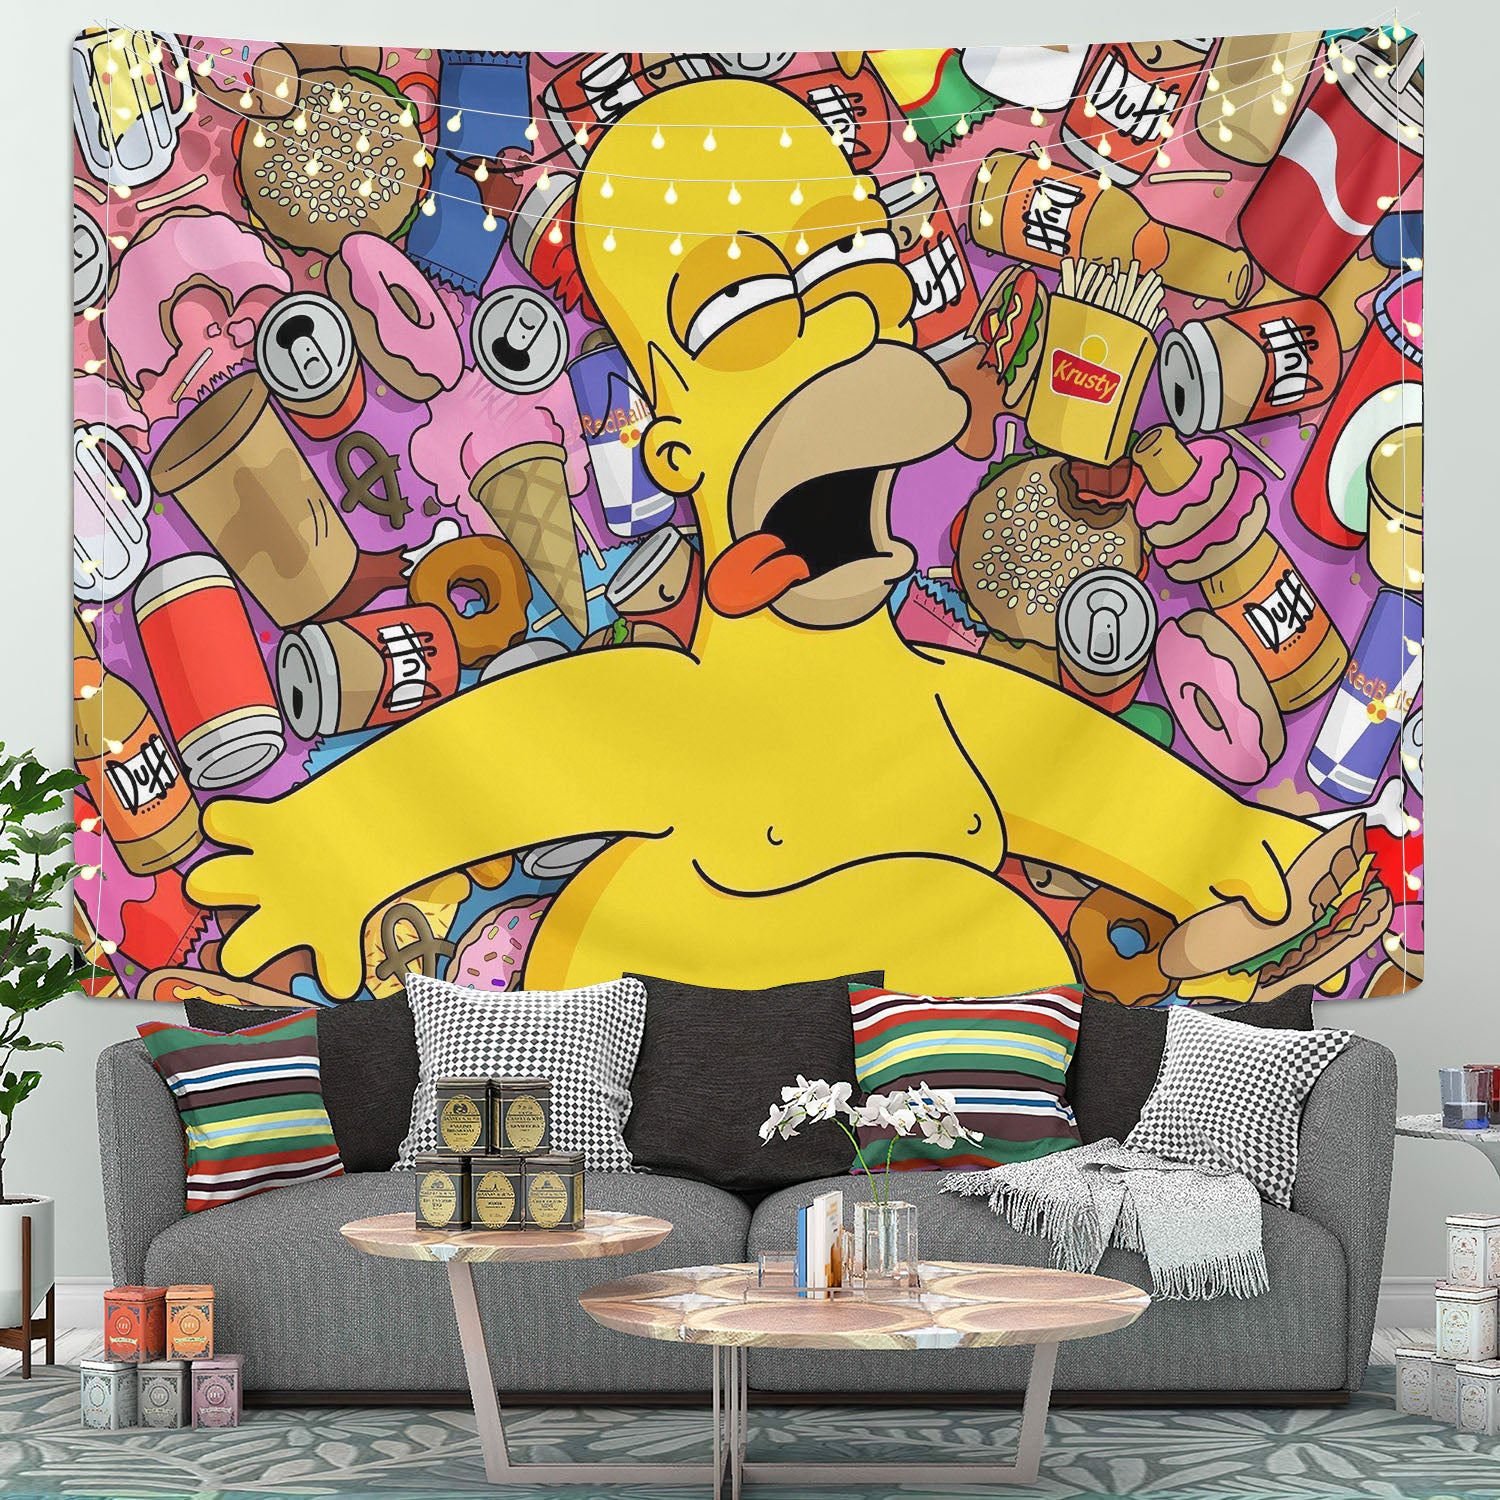 The Simpsons Tapestry Room Decor